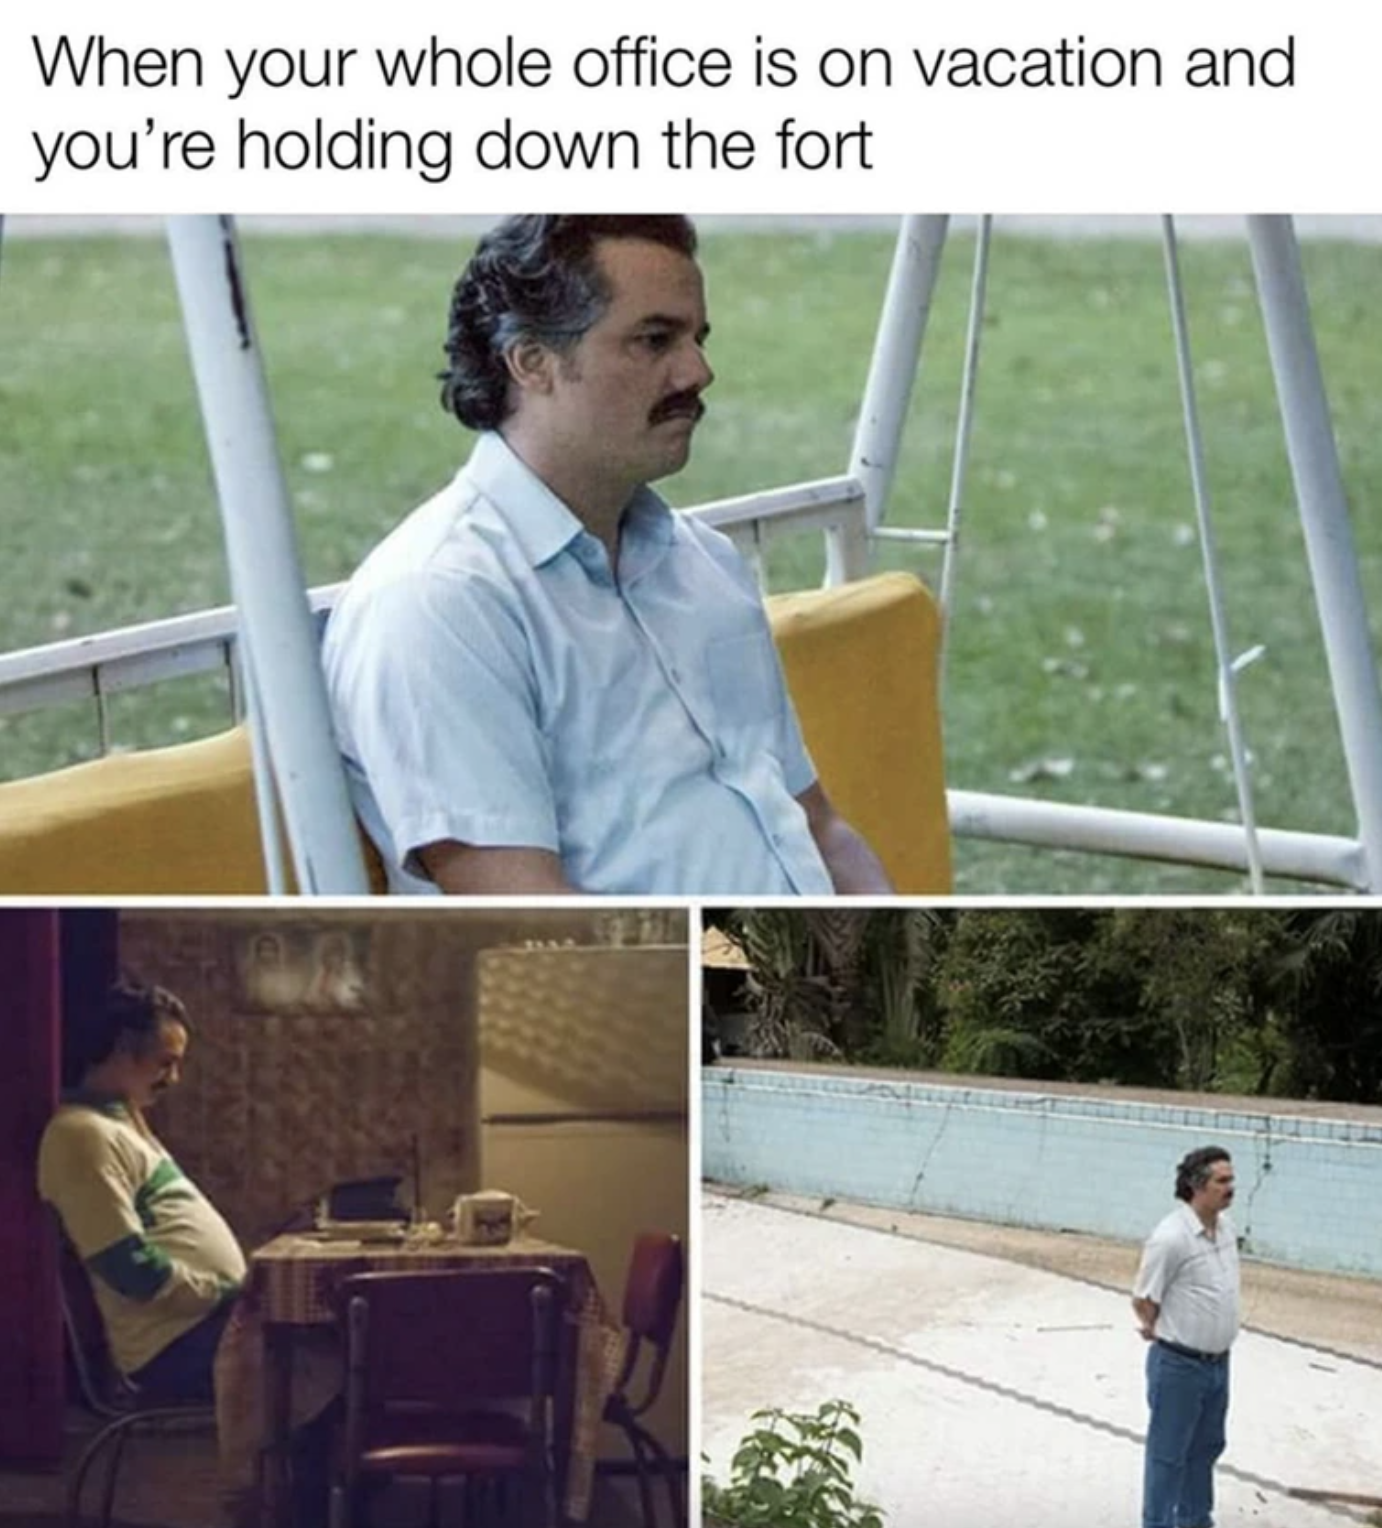 waiting for something meme - When your whole office is on vacation and you're holding down the fort